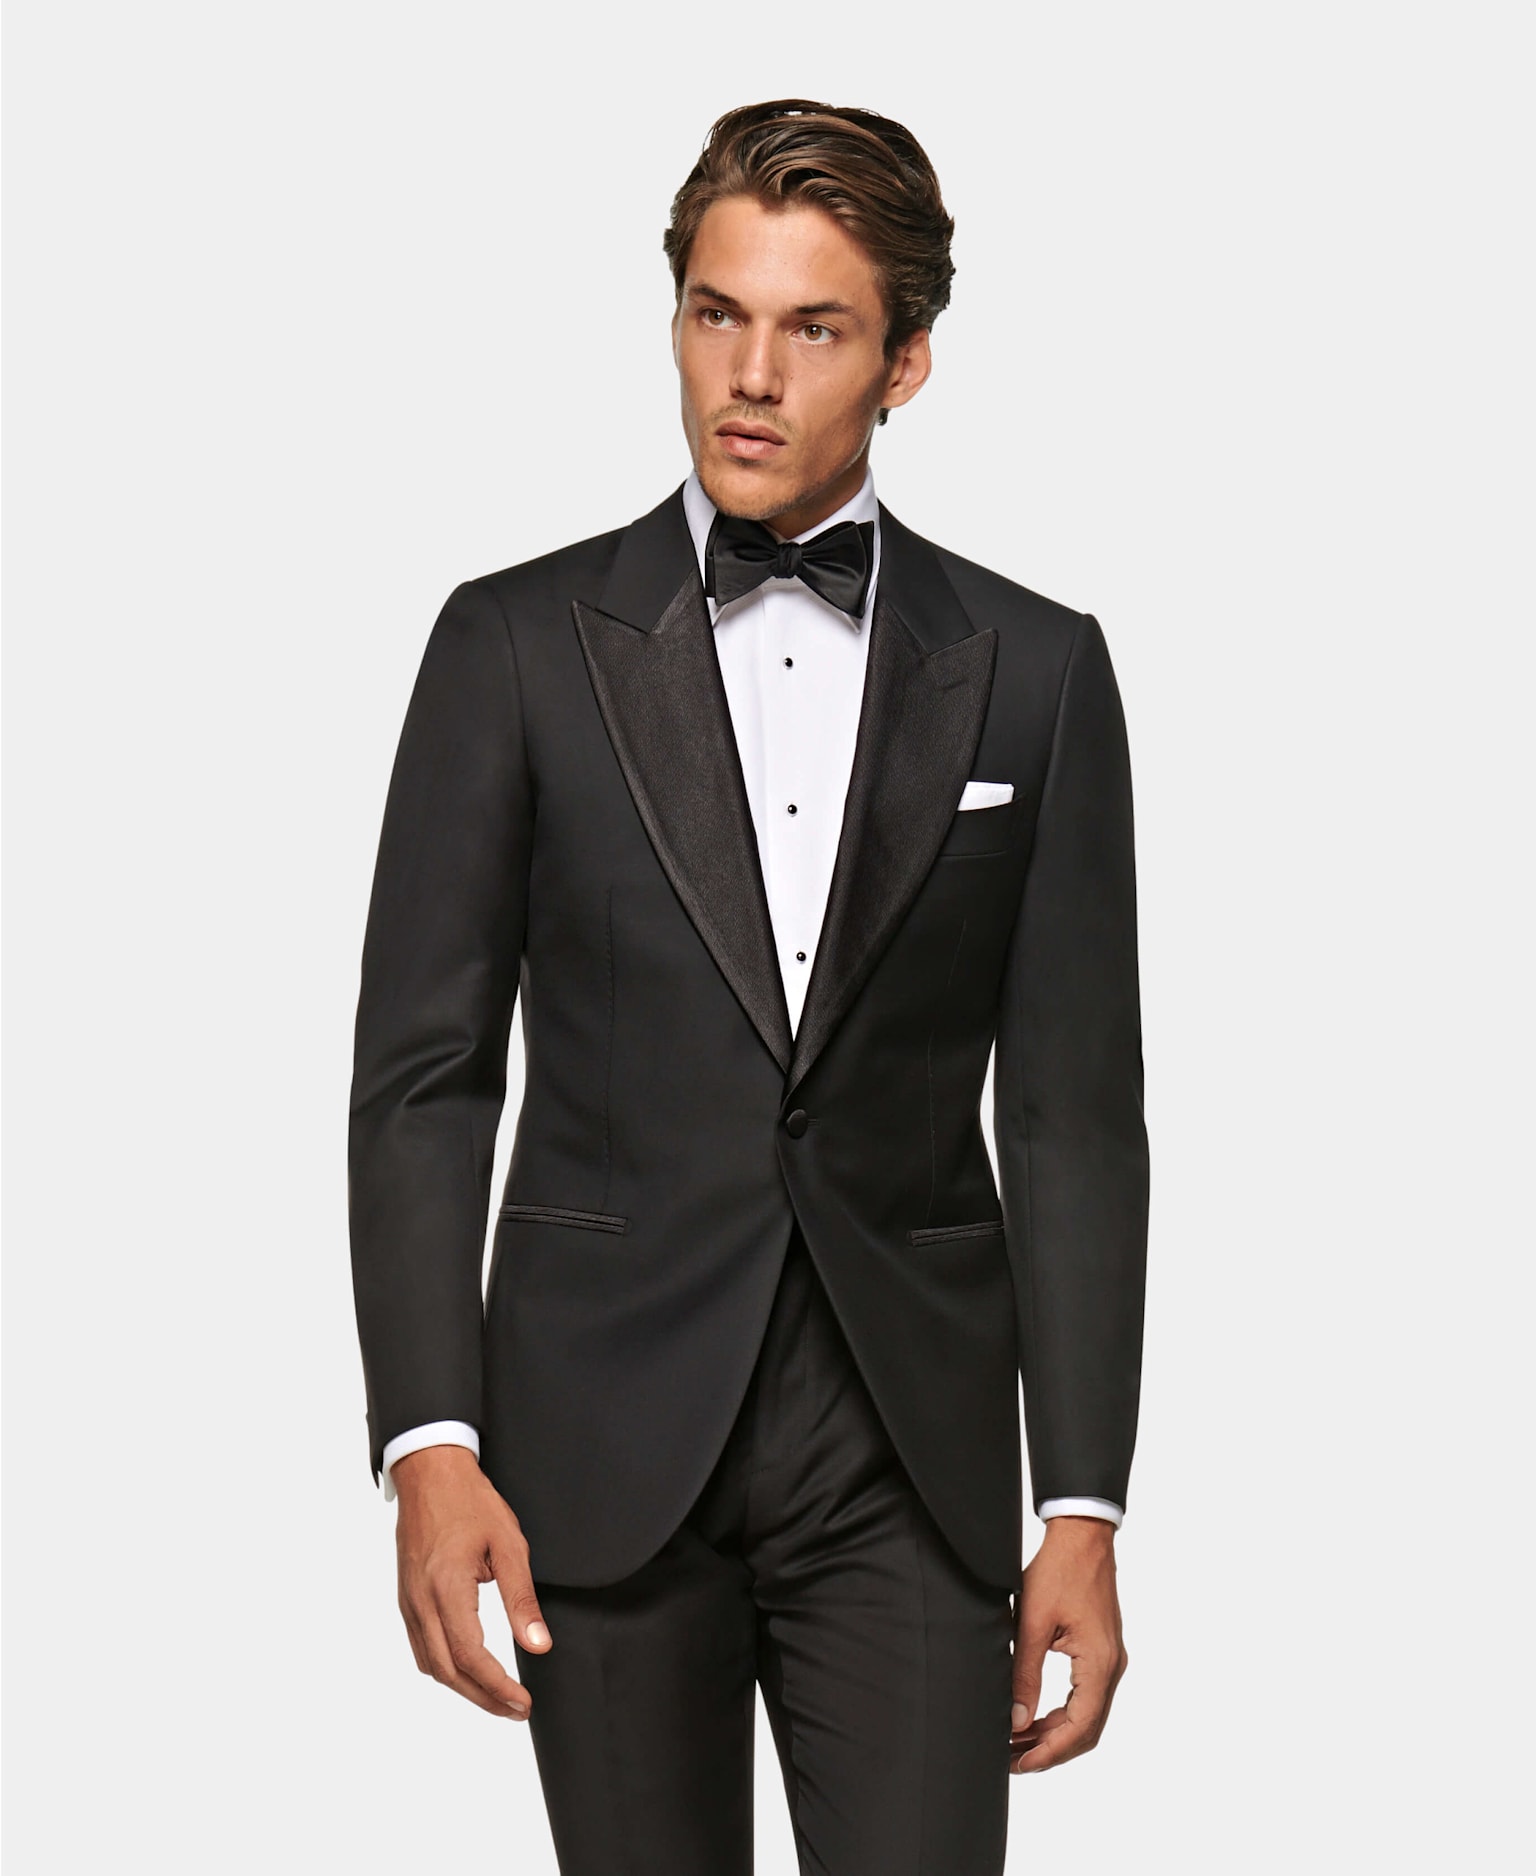 Black tie dress code decoded | SUITSUPPLY US